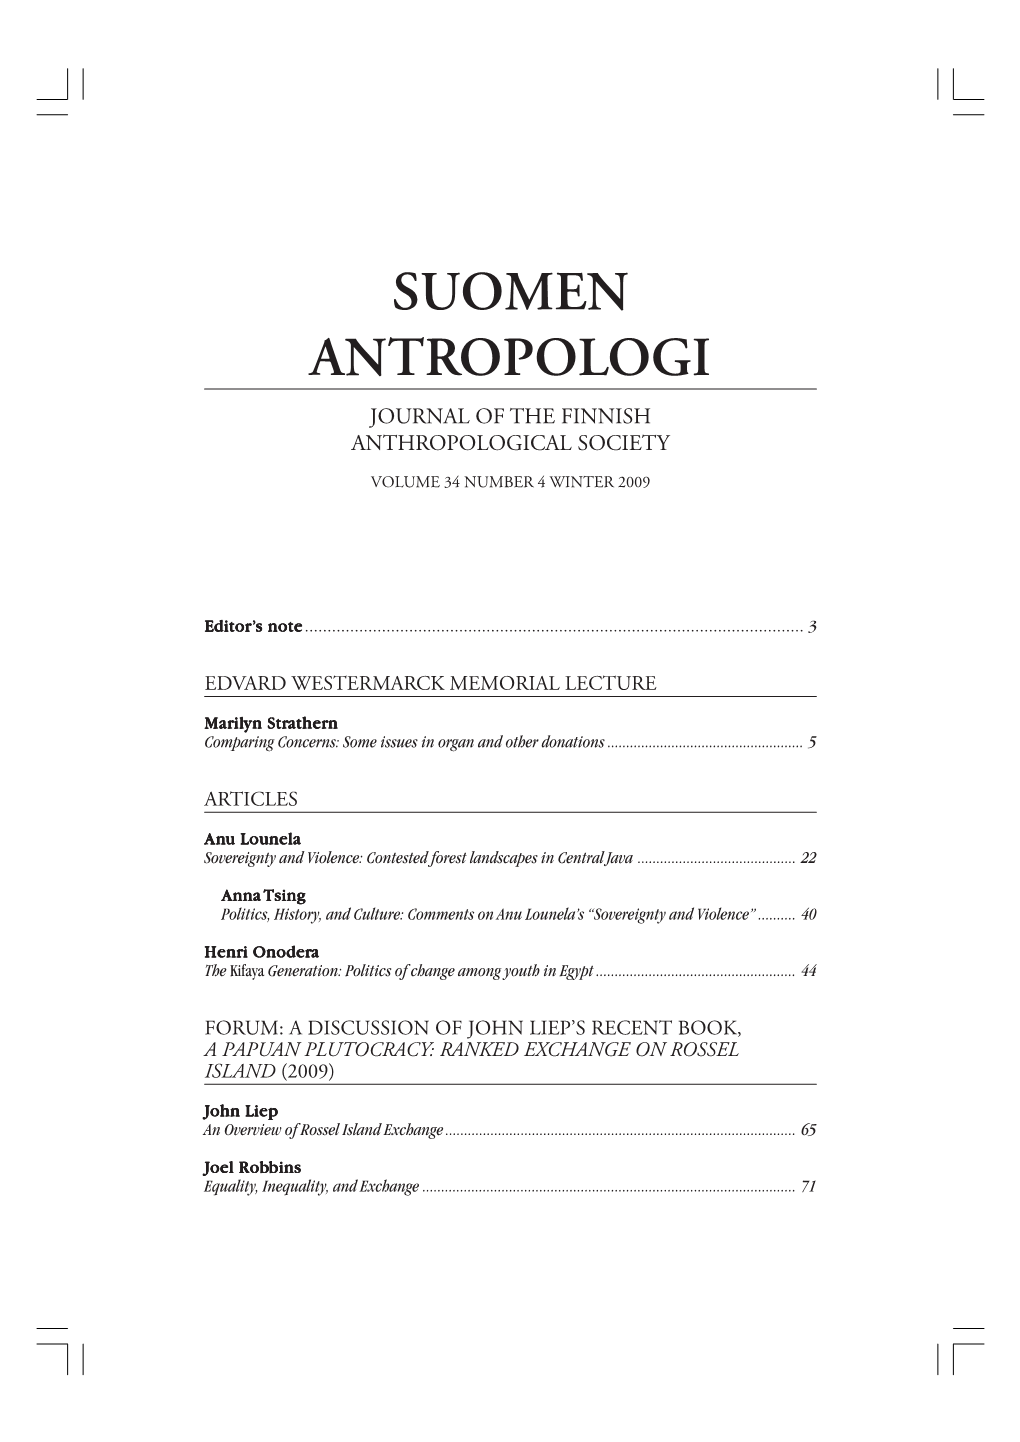 Suomen Antropologi Journal of the Finnish Anthropological Society